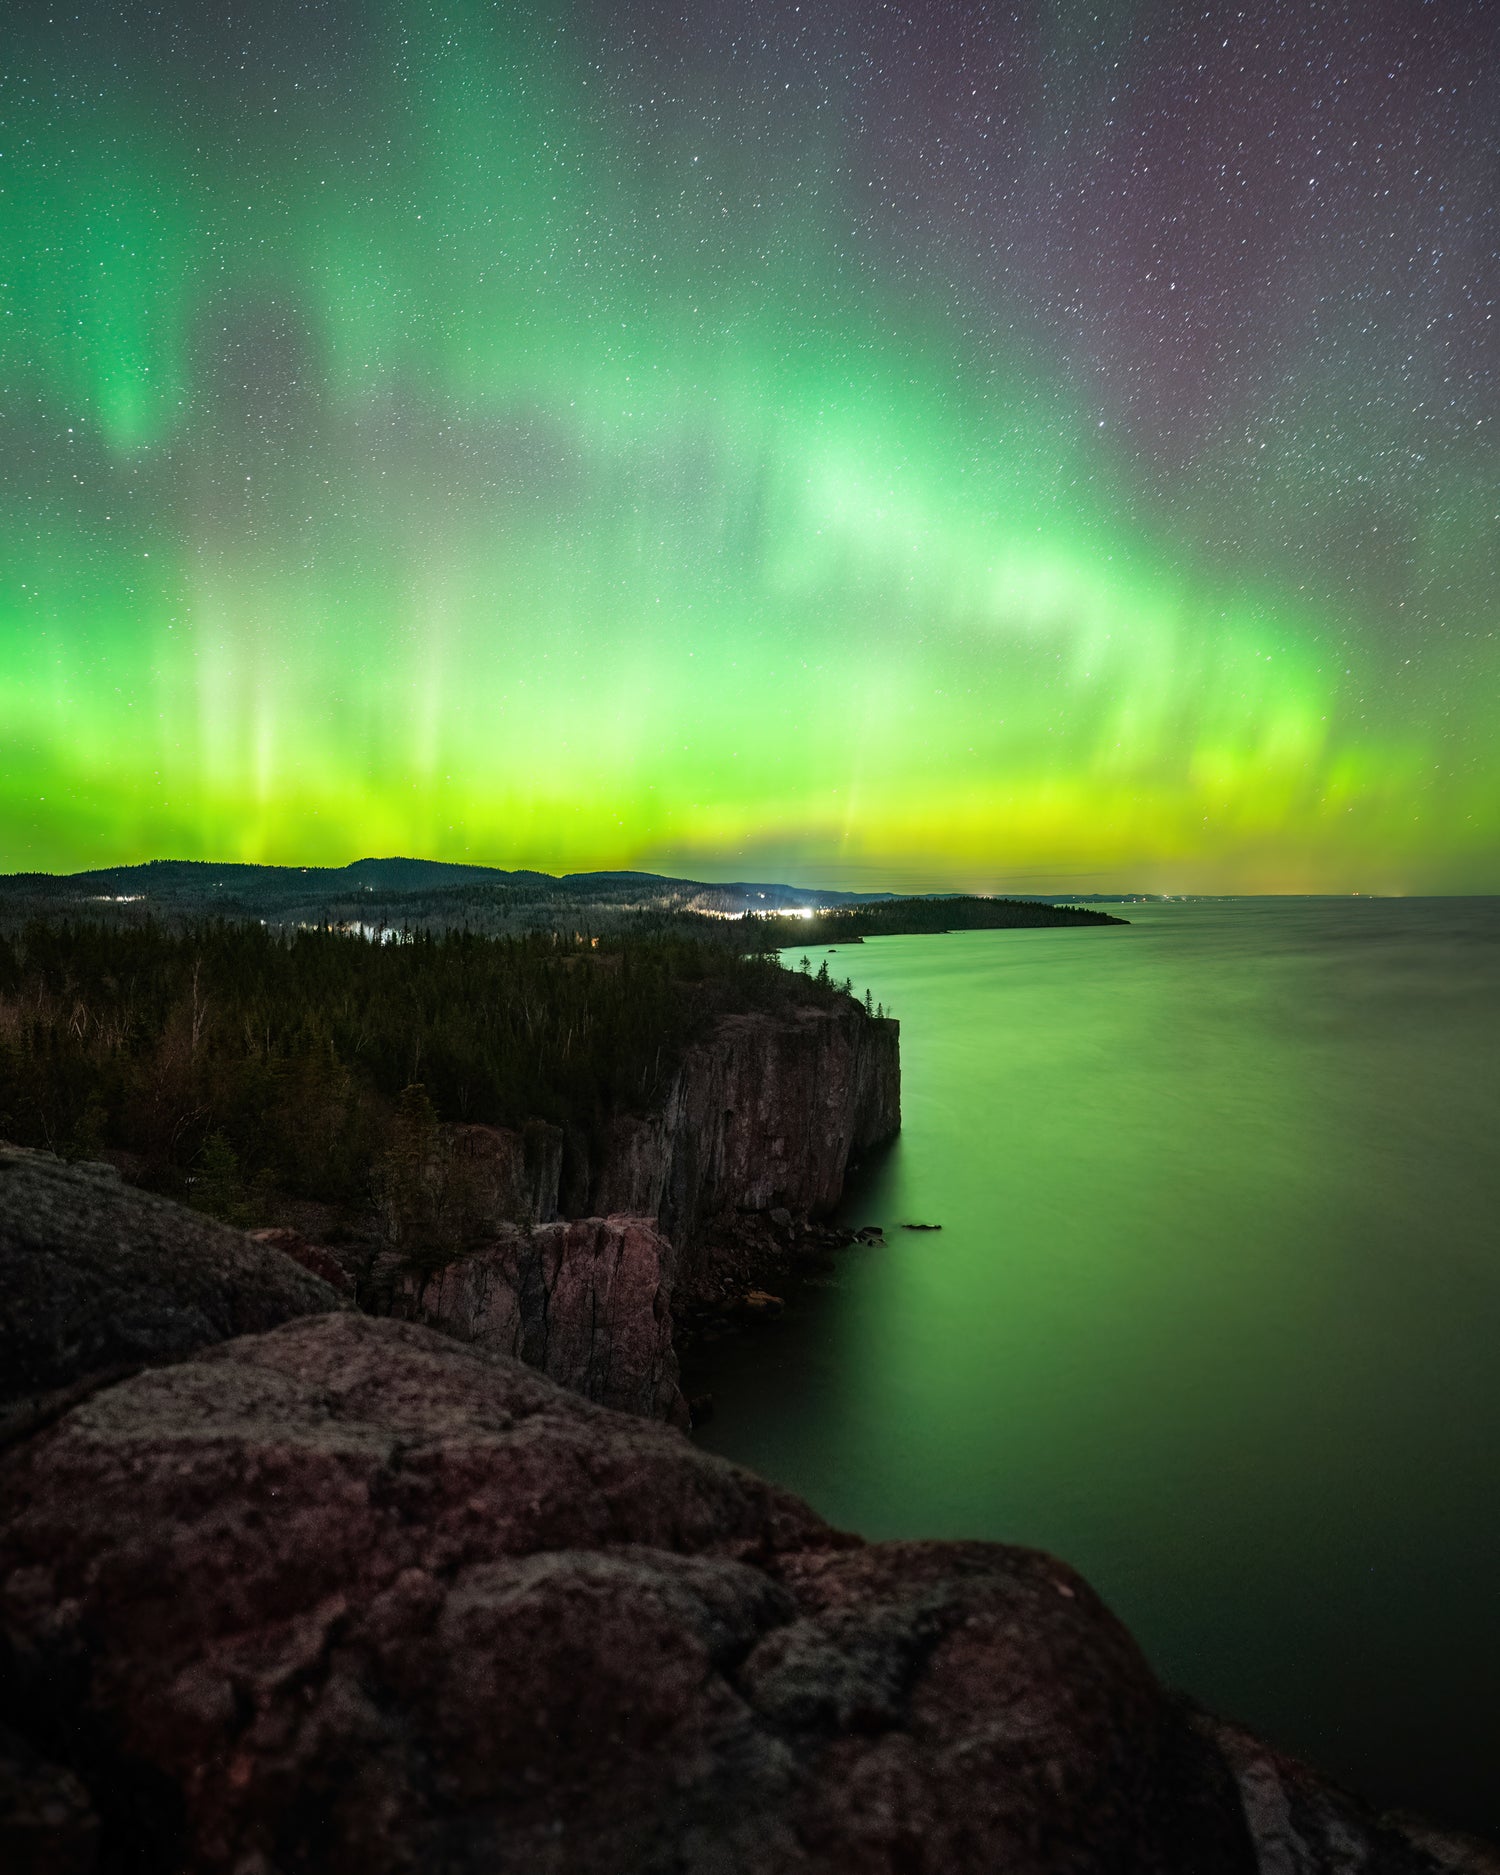 Bright green and purple aurora borealis over Lake Superior in Minnesota. Photo captured by Vincent Ledvina, The Aurora Guy